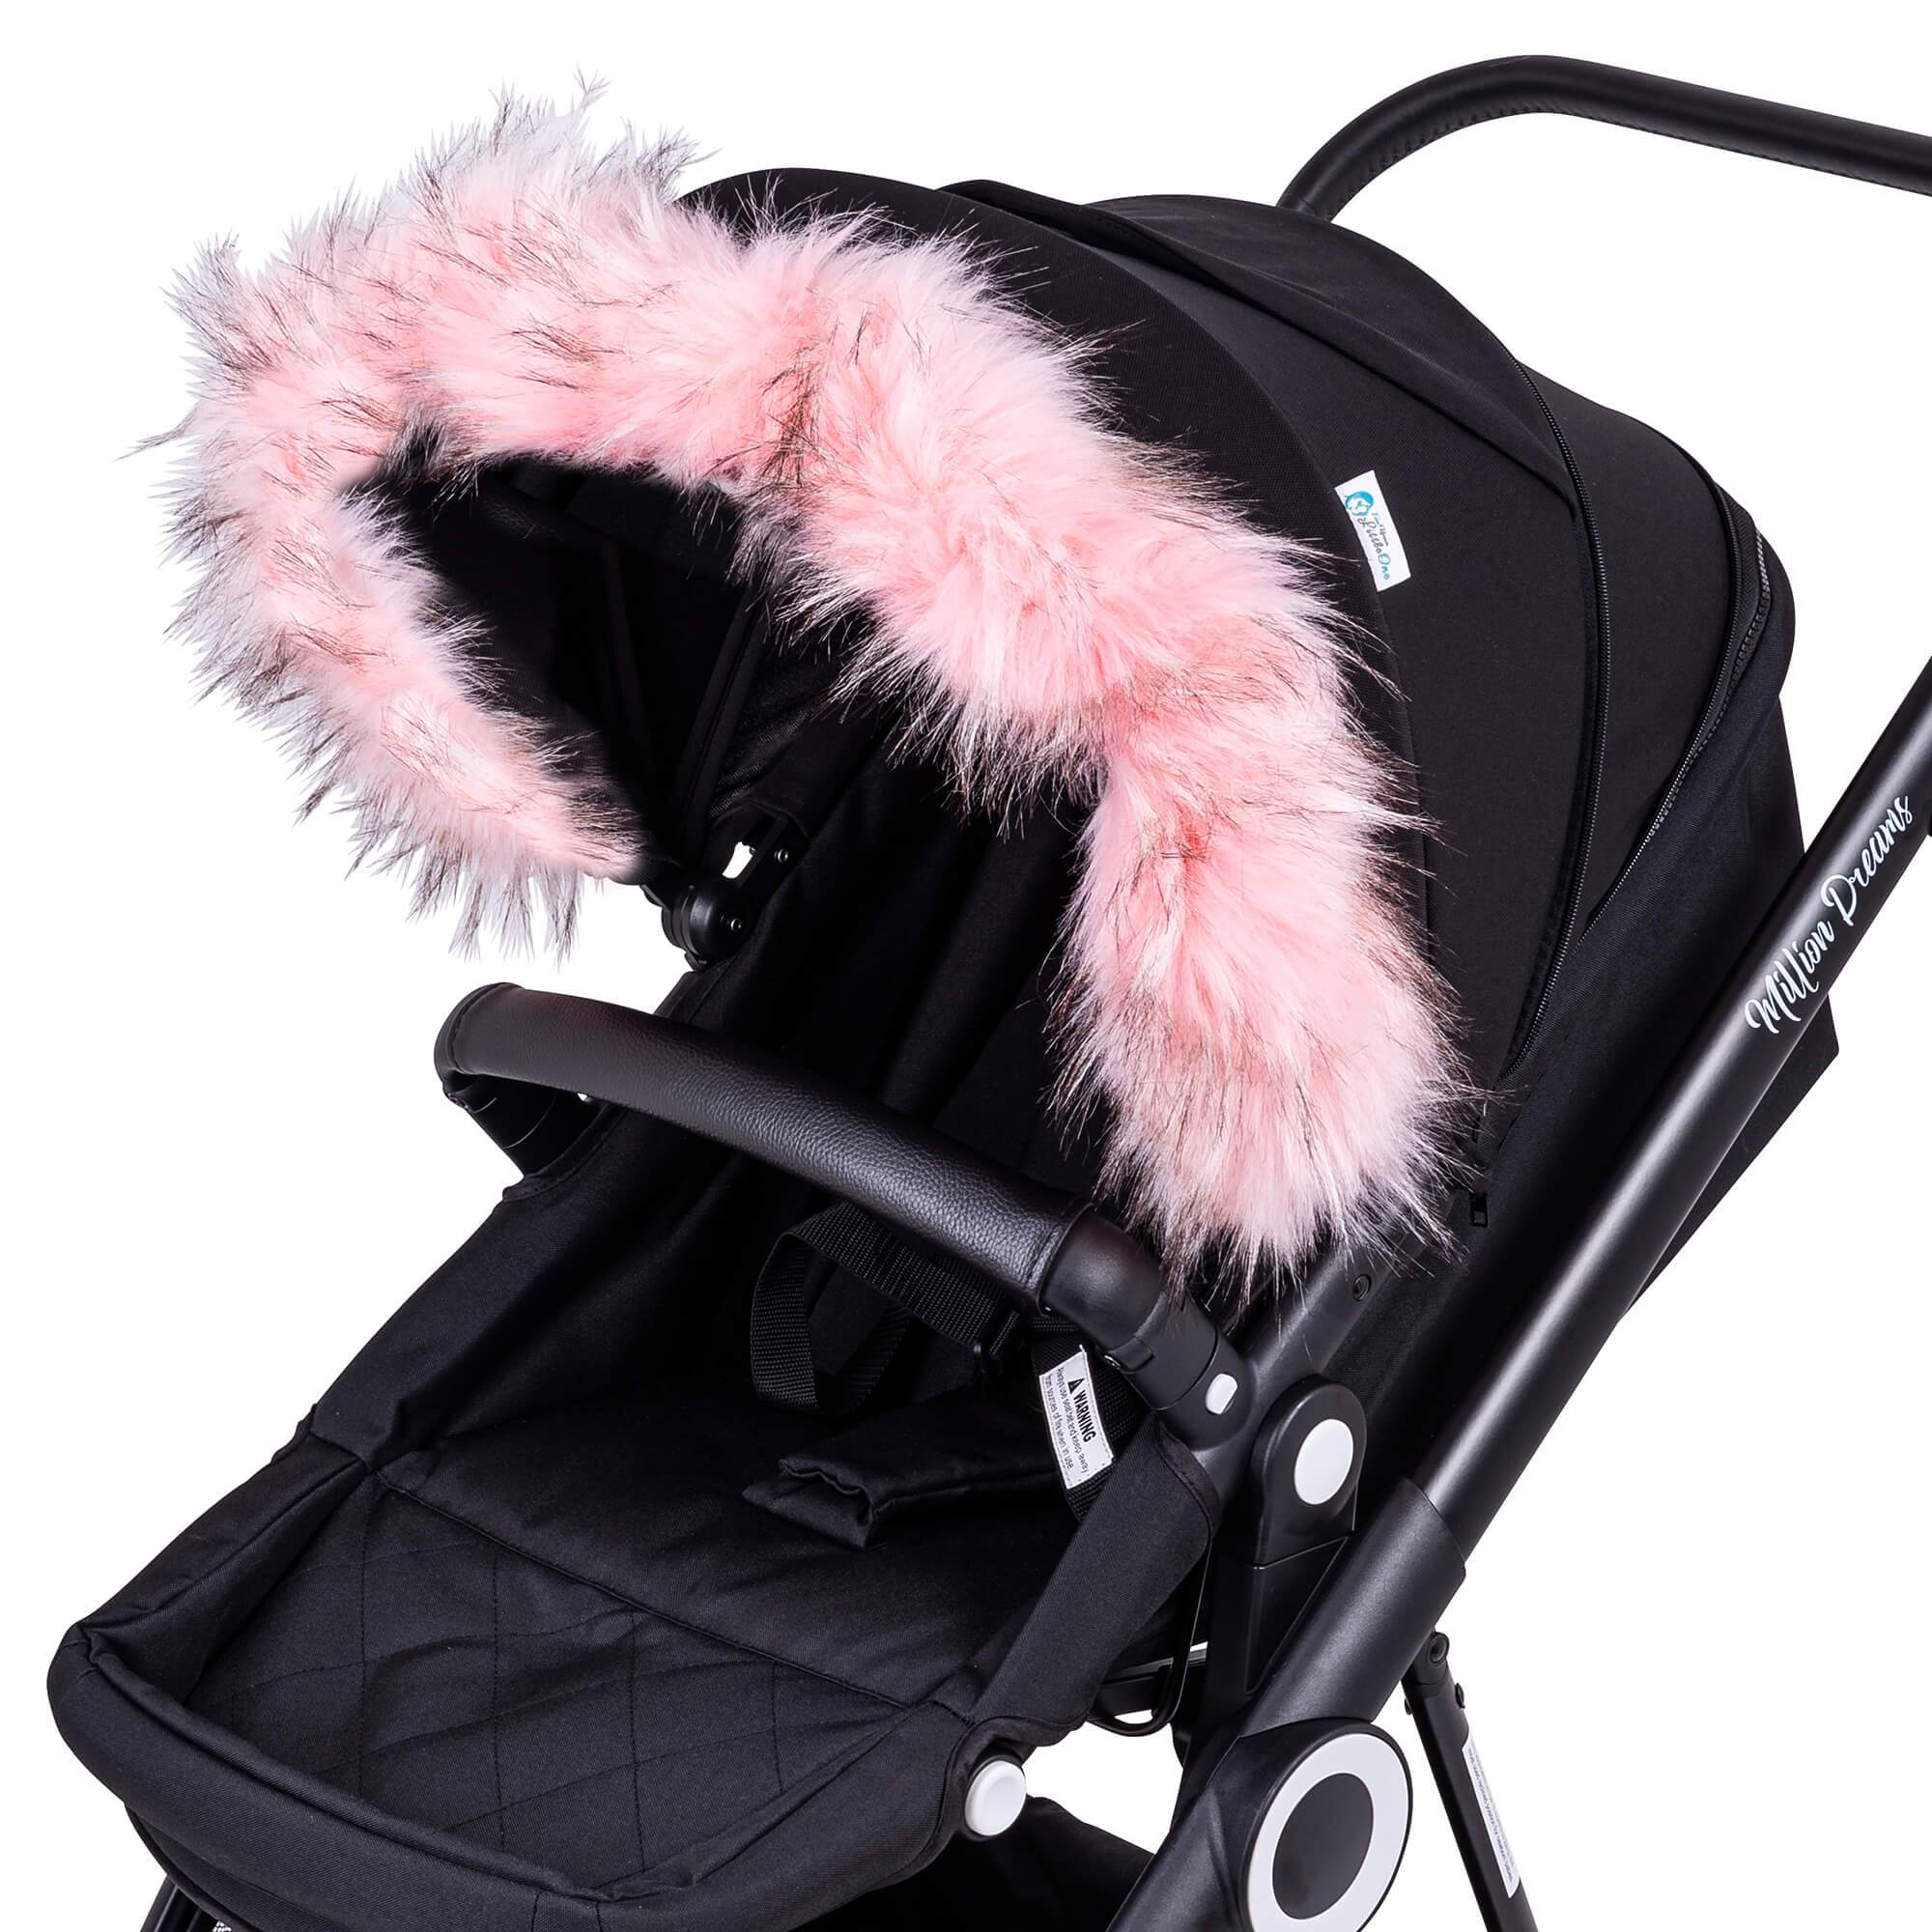 Pram Fur Hood Trim Attachment for Pushchair - For Your Little One